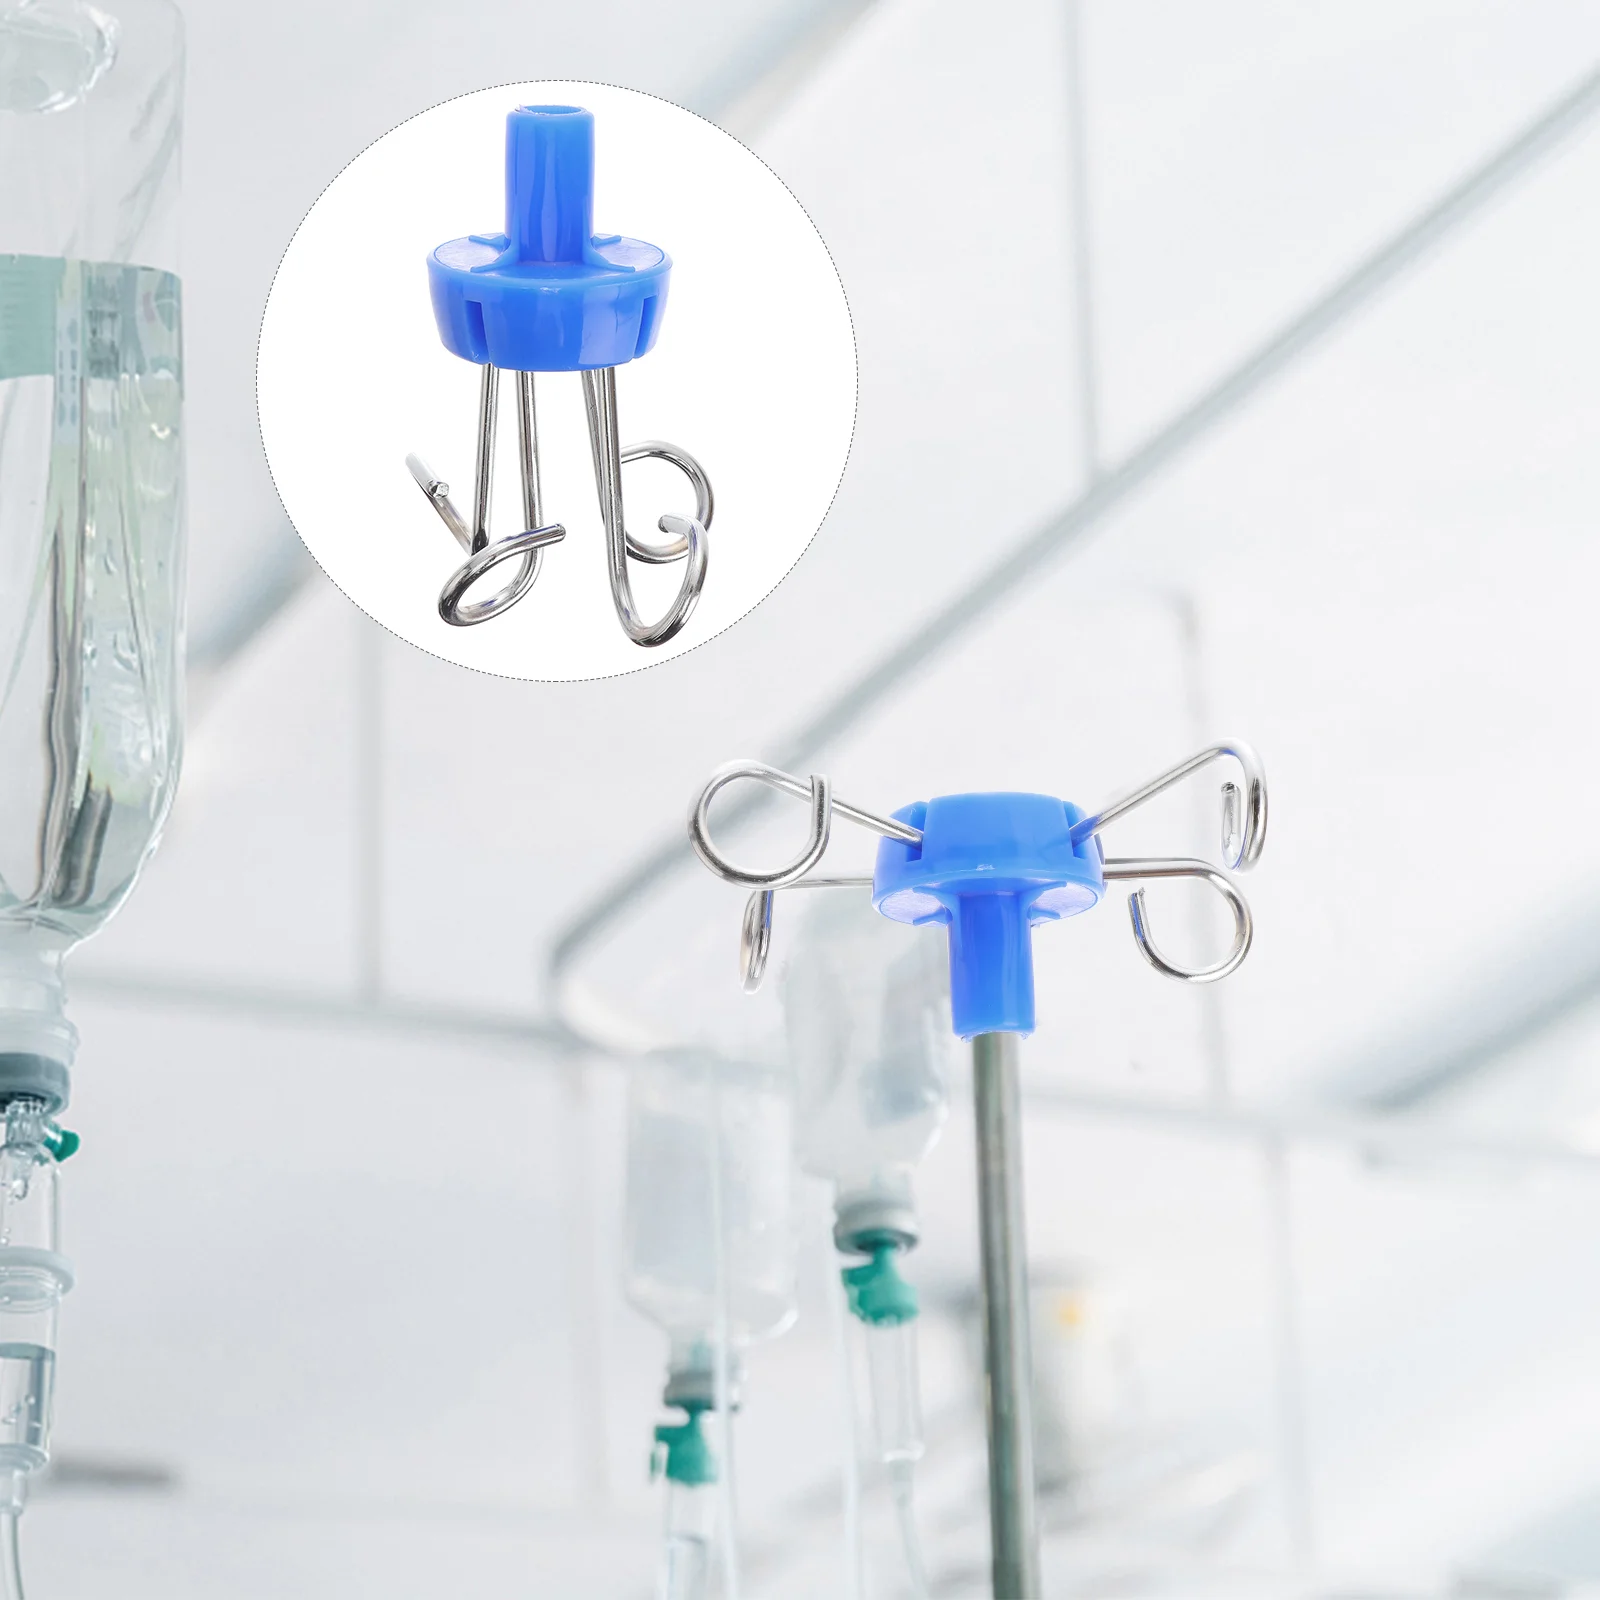 Stand Hanger Iv Pole Hooks Infusion Drip Rack Hook Metal Floor Stainless Vertical Hangers Hanging Clinic Bottle